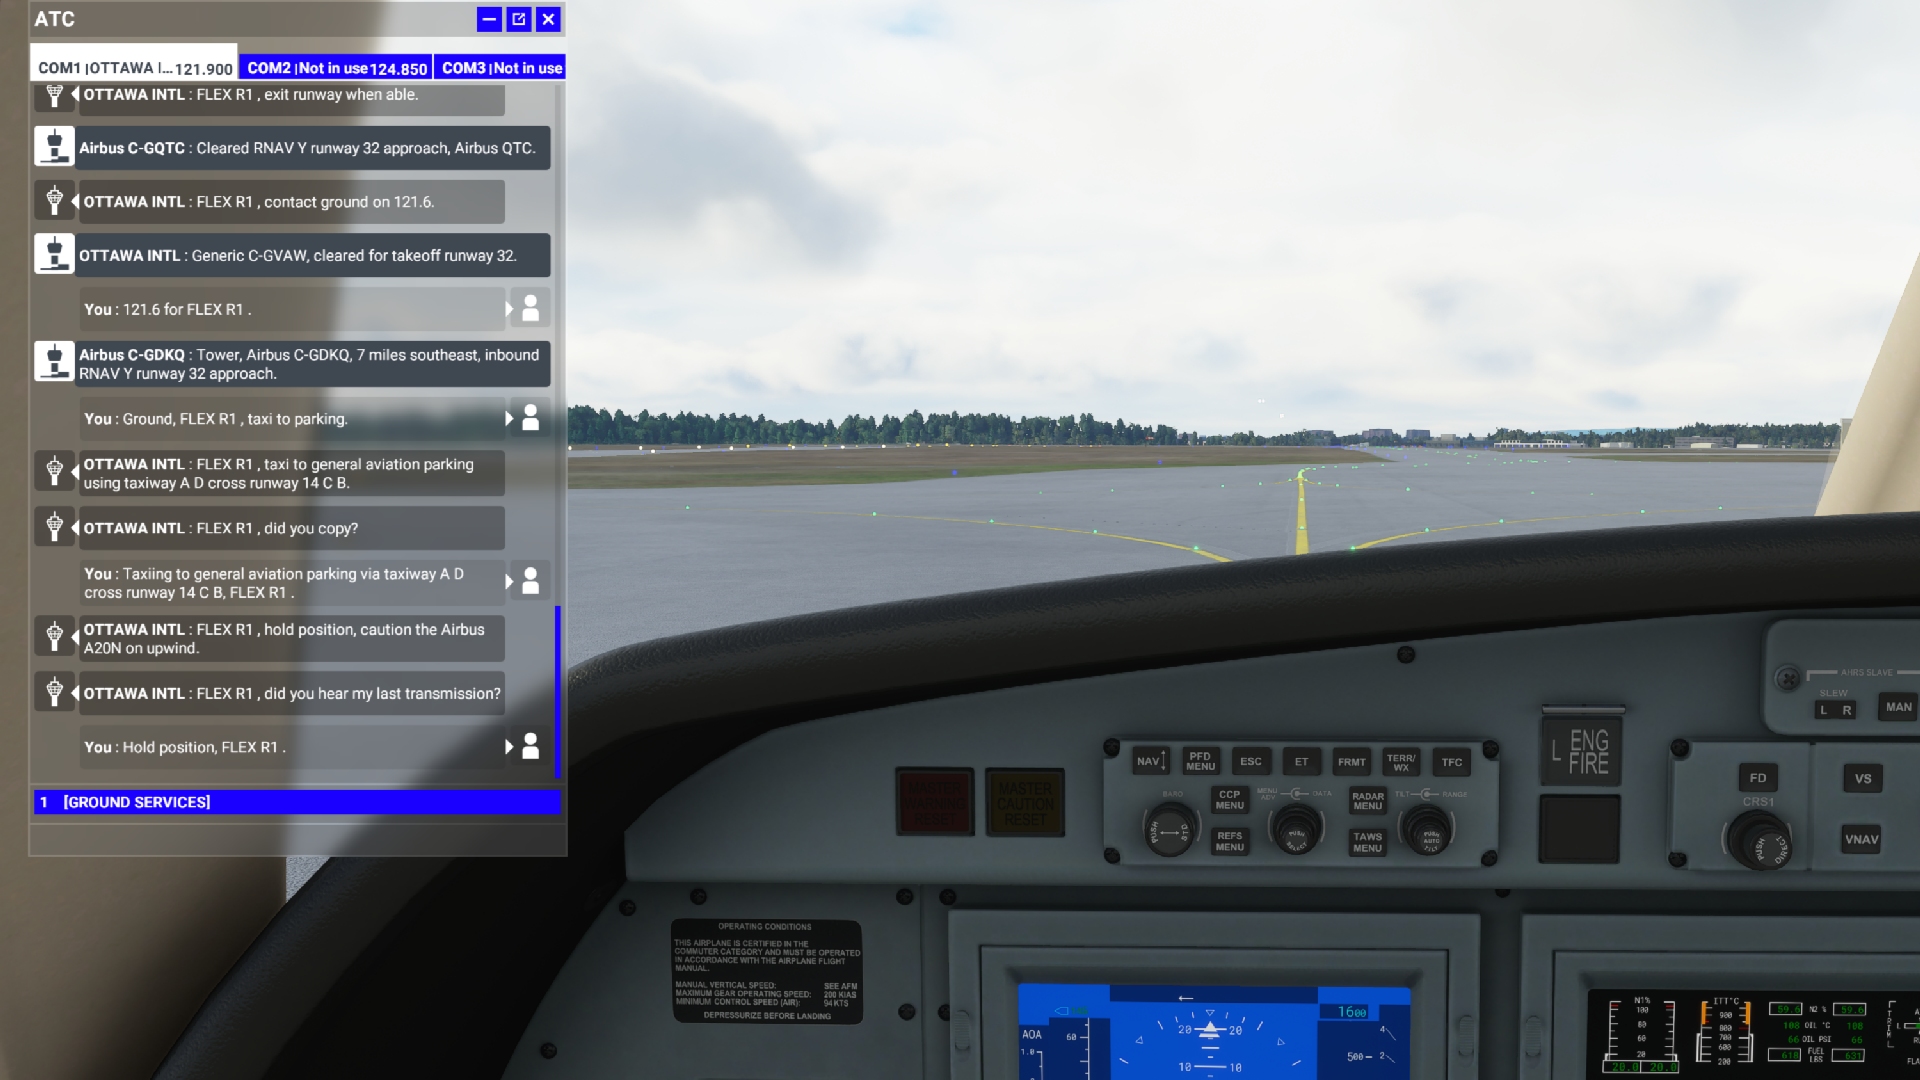 Perfect Flight - FS Approaches - Pilot In Command MSFS